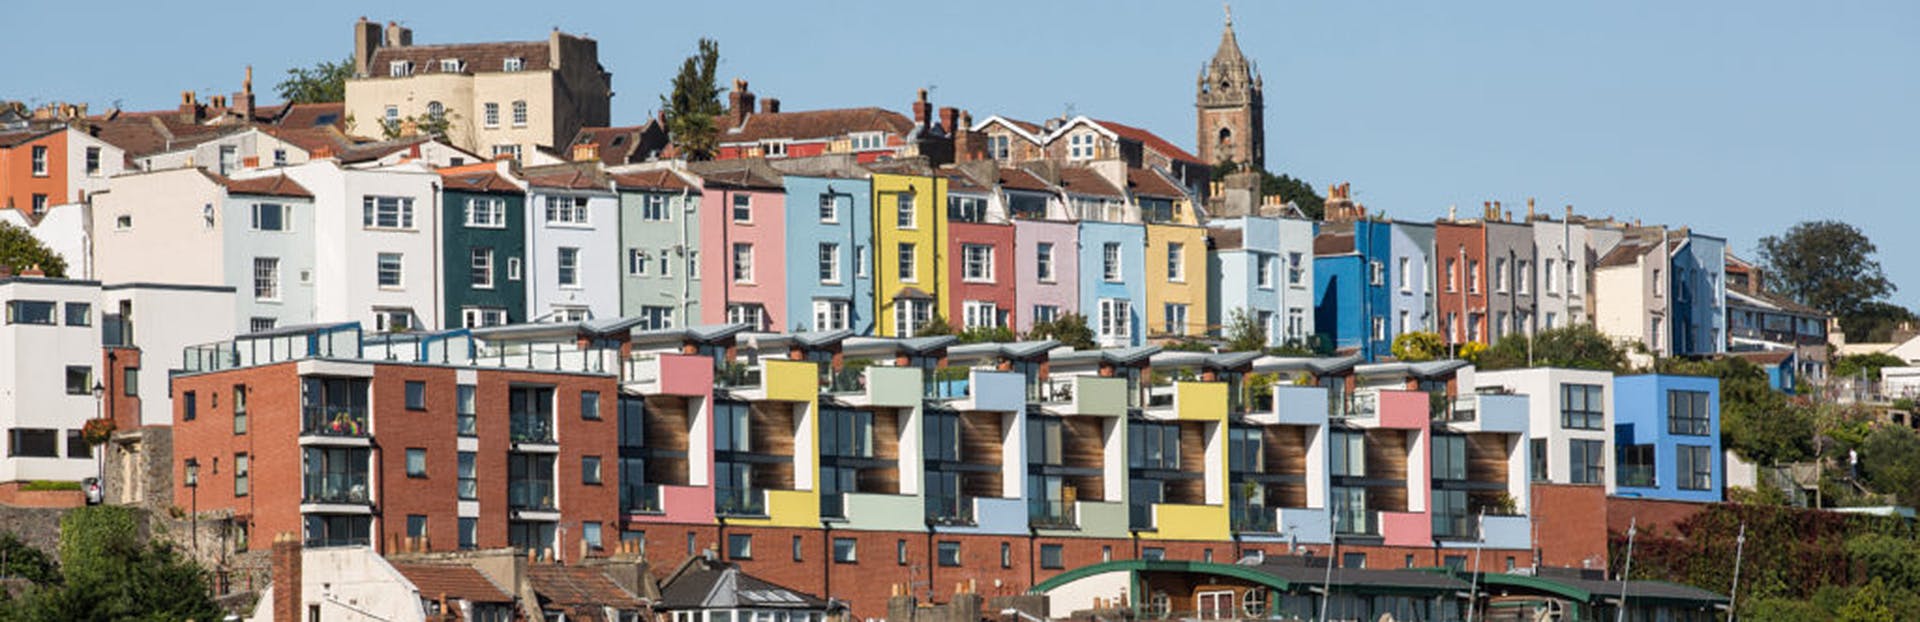 Explore the best of the Old City of Bristol on a self-guided audio tour